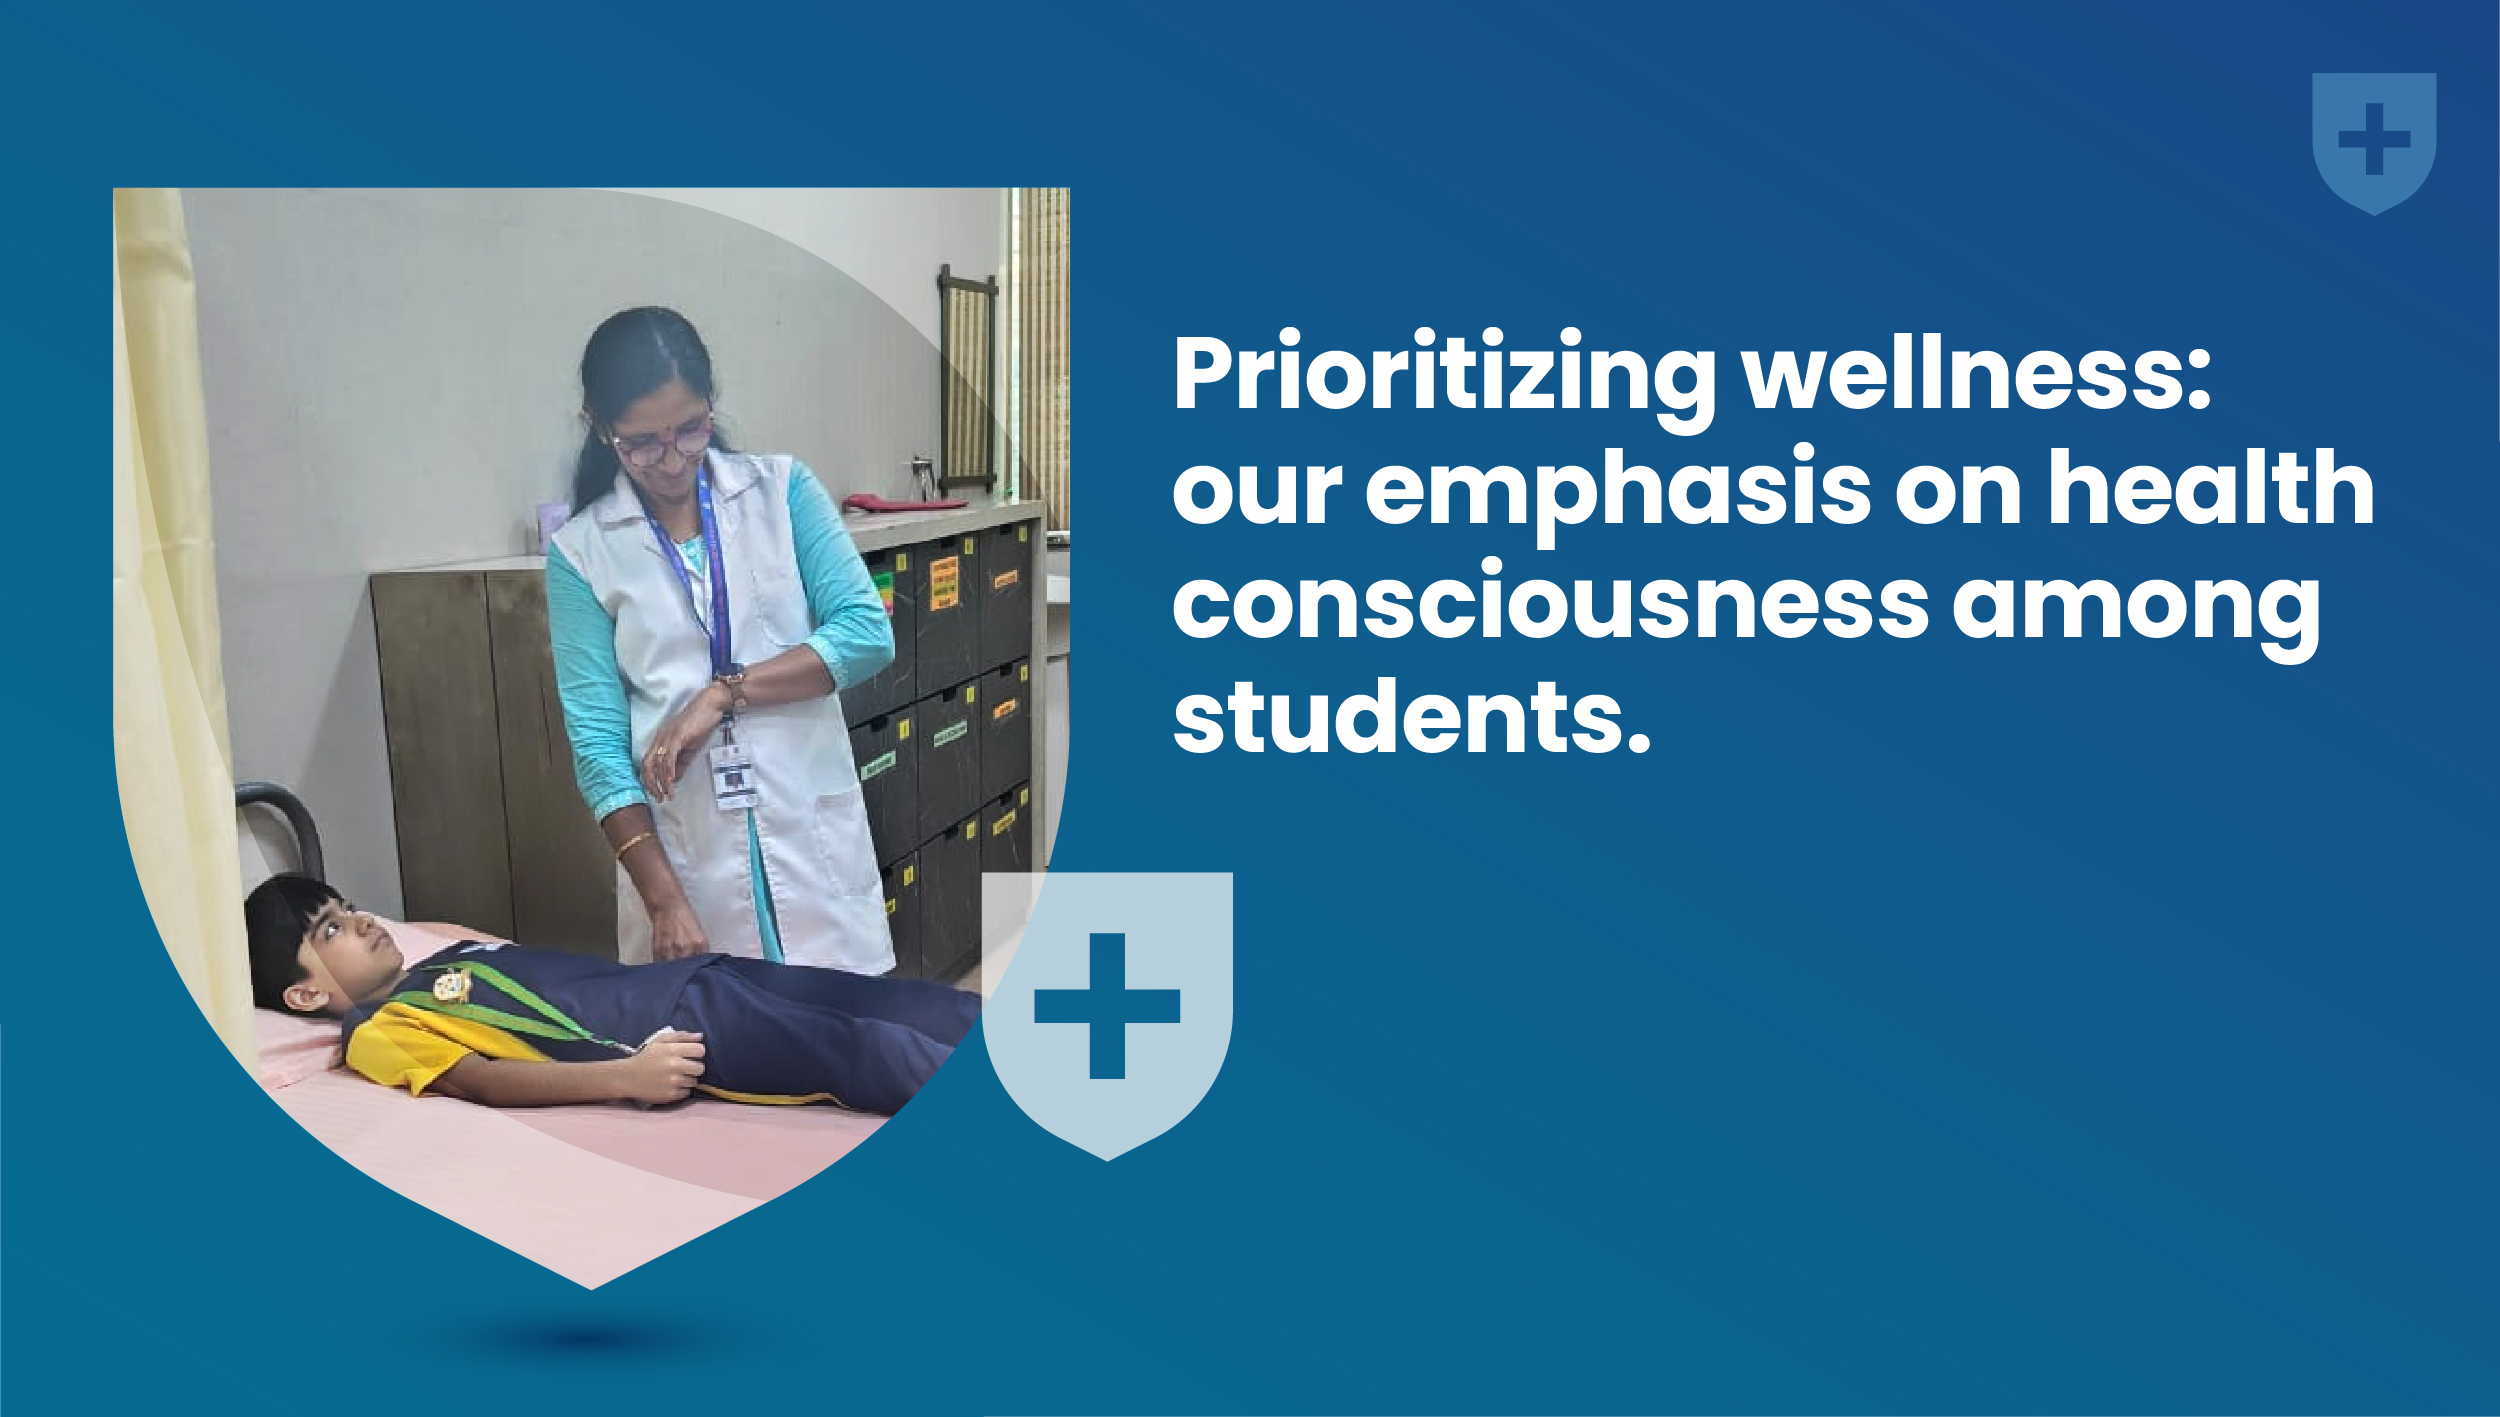 PRIORITIZING WELLNESS: OUR EMPHASIS ON HEALTH CONSCIOUSNESS AMONG STUDENTS.